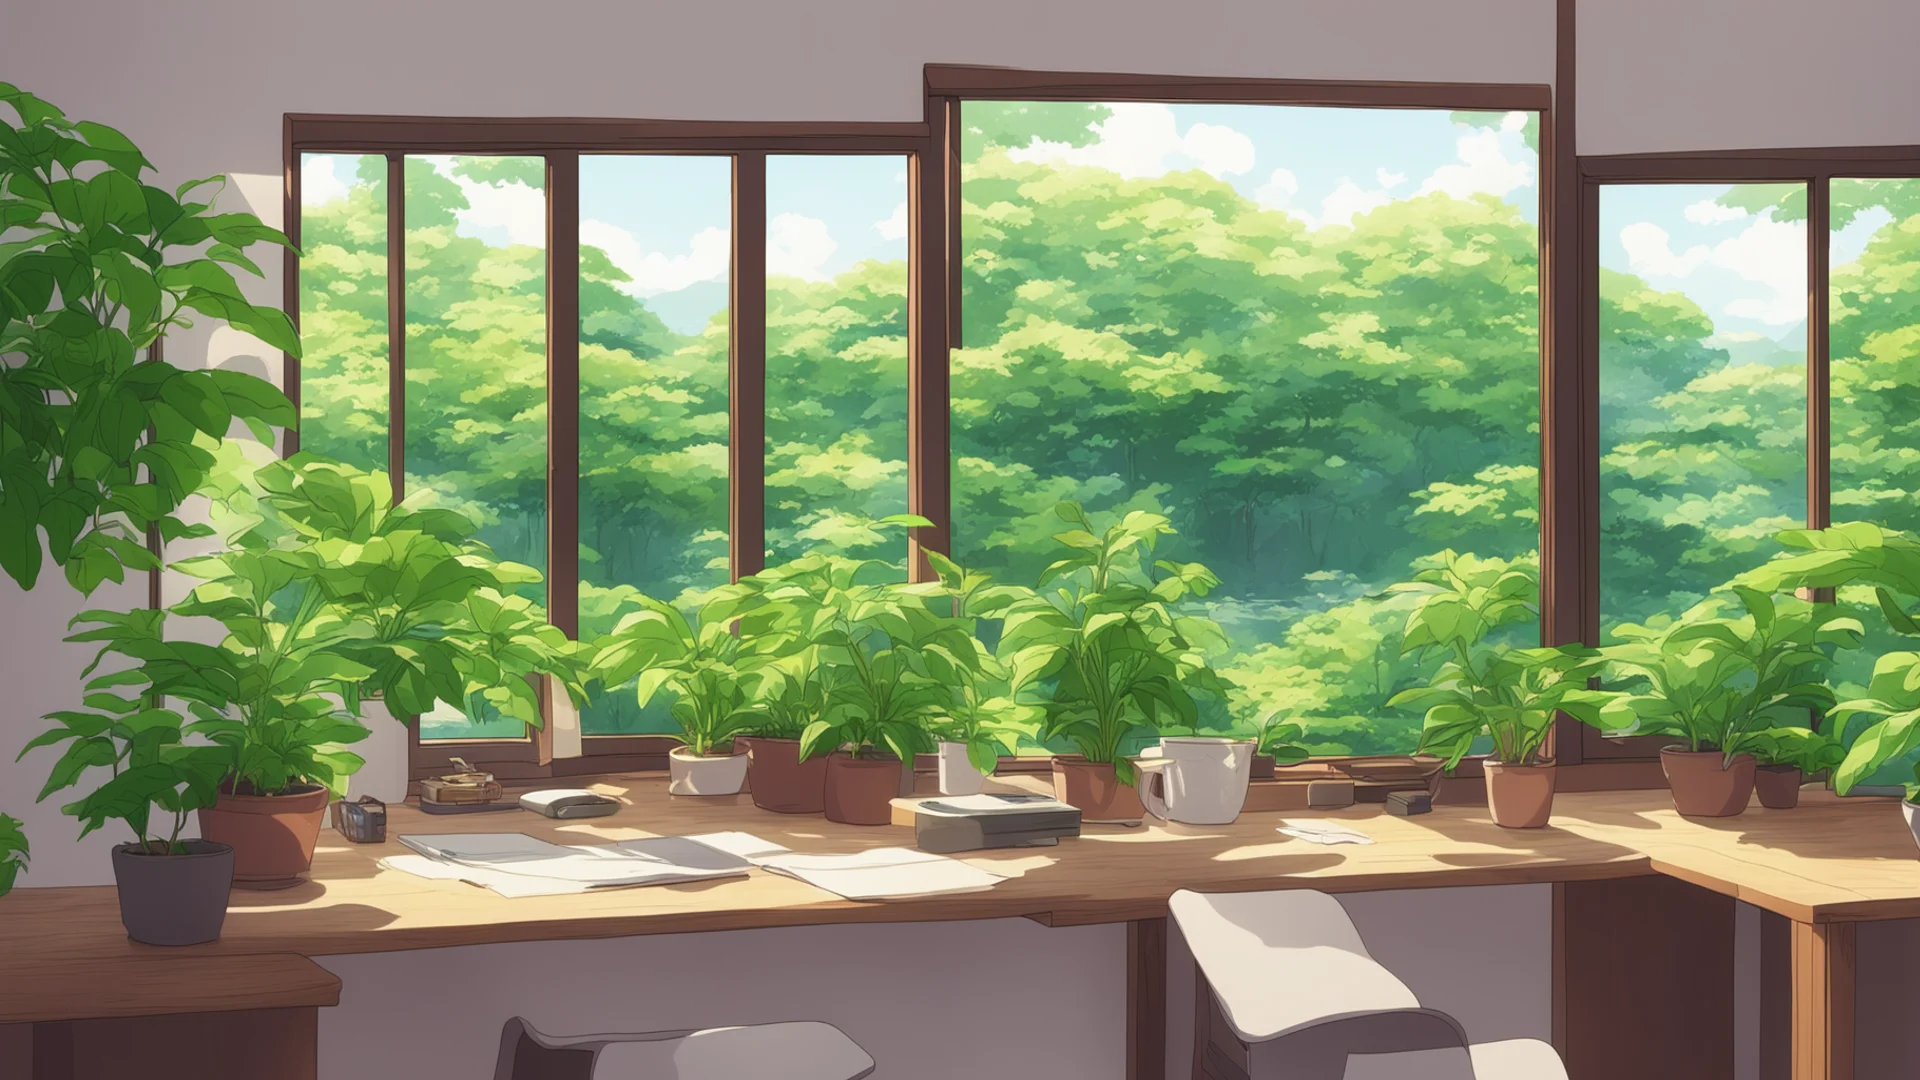 aijapanese interior. window view with a desk. plants on desk anime style. chill cozy room. verdant. wide